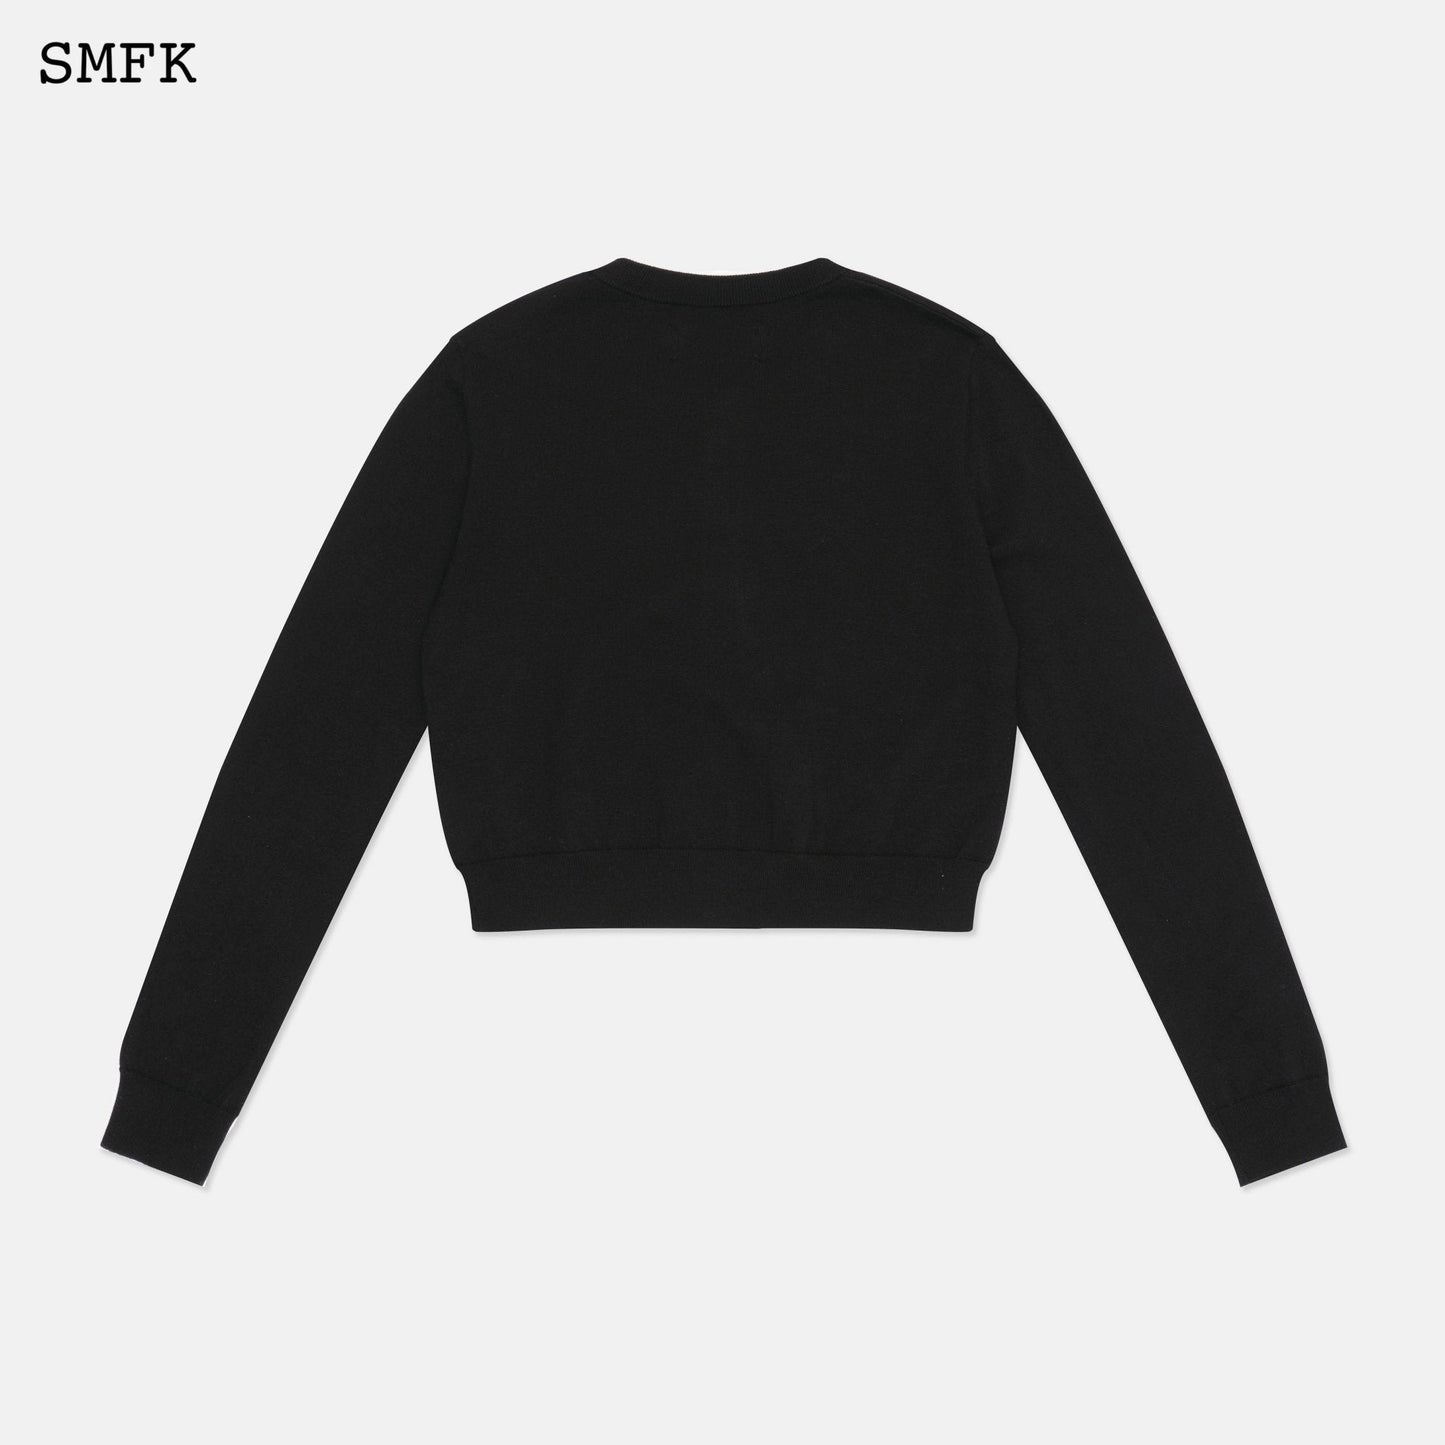 SMFK Compass Academy Black Knitted Cardigan